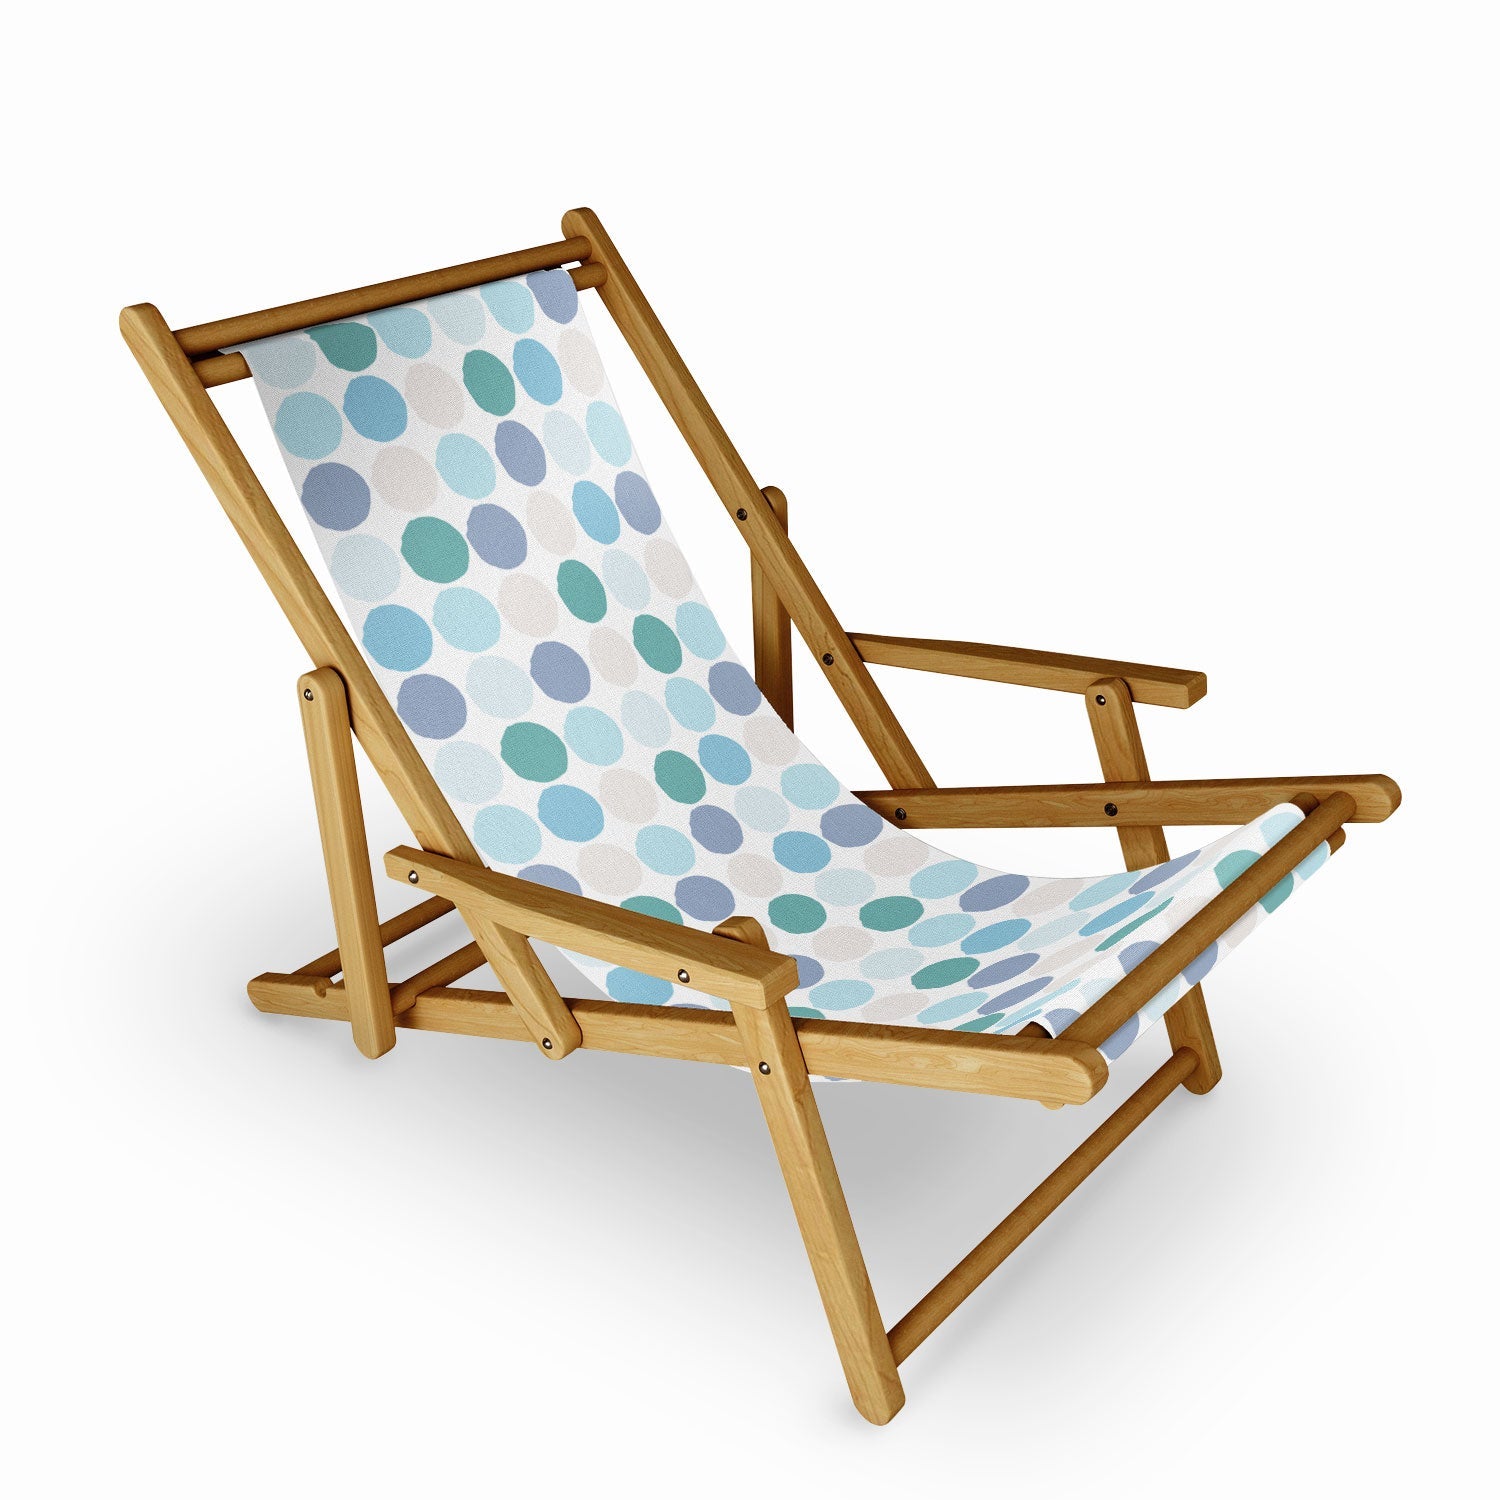 Retro Pattern Beach Chair Collection (12 patterns)